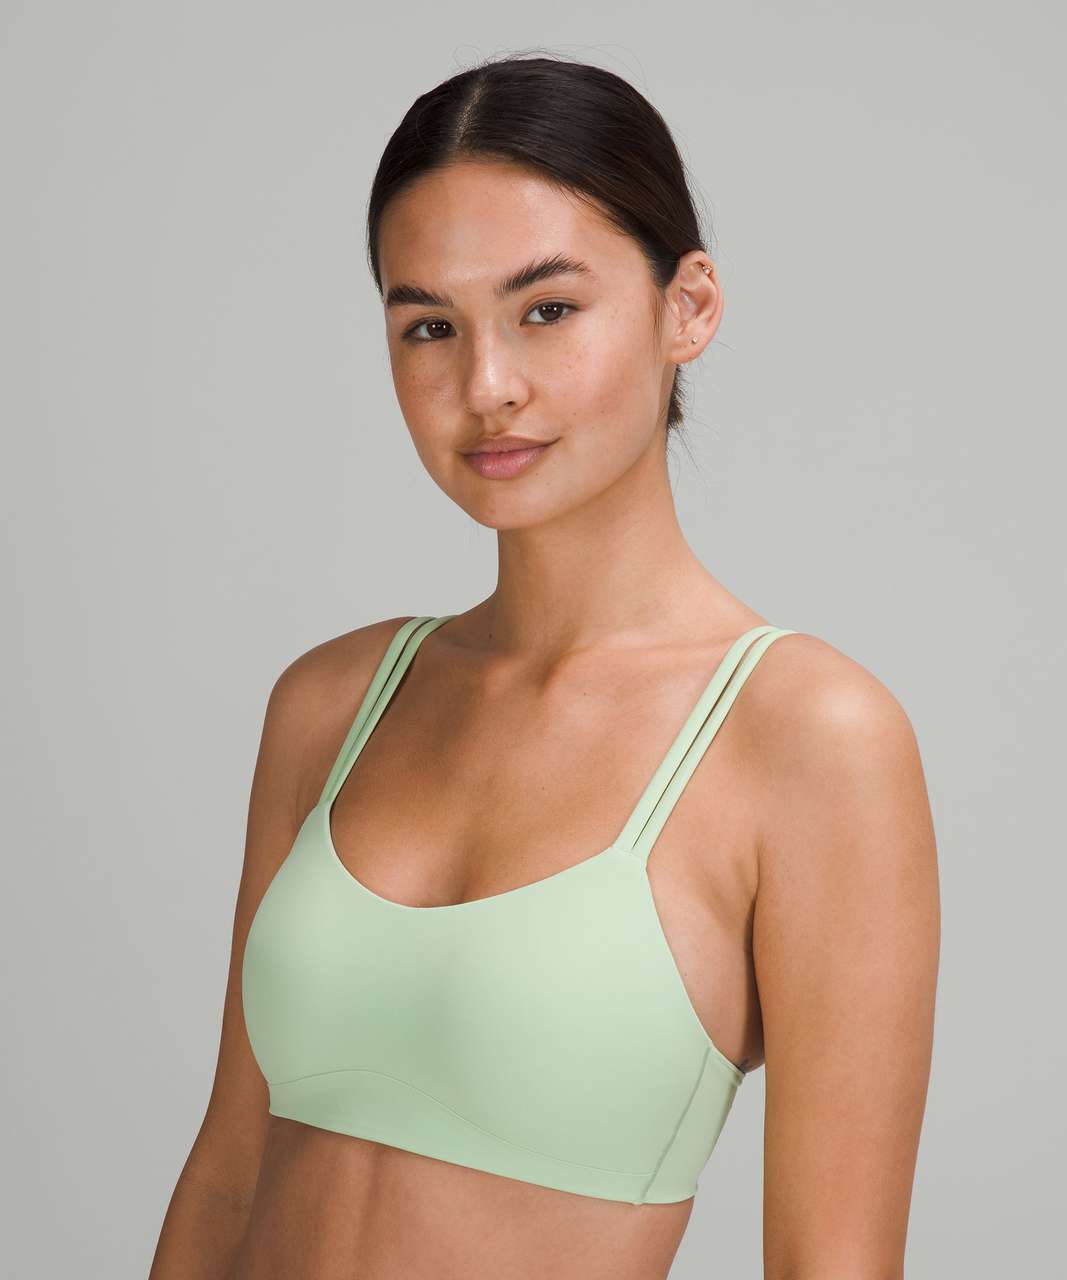 Got my first like a cloud bra today in delicate mint! Colour is